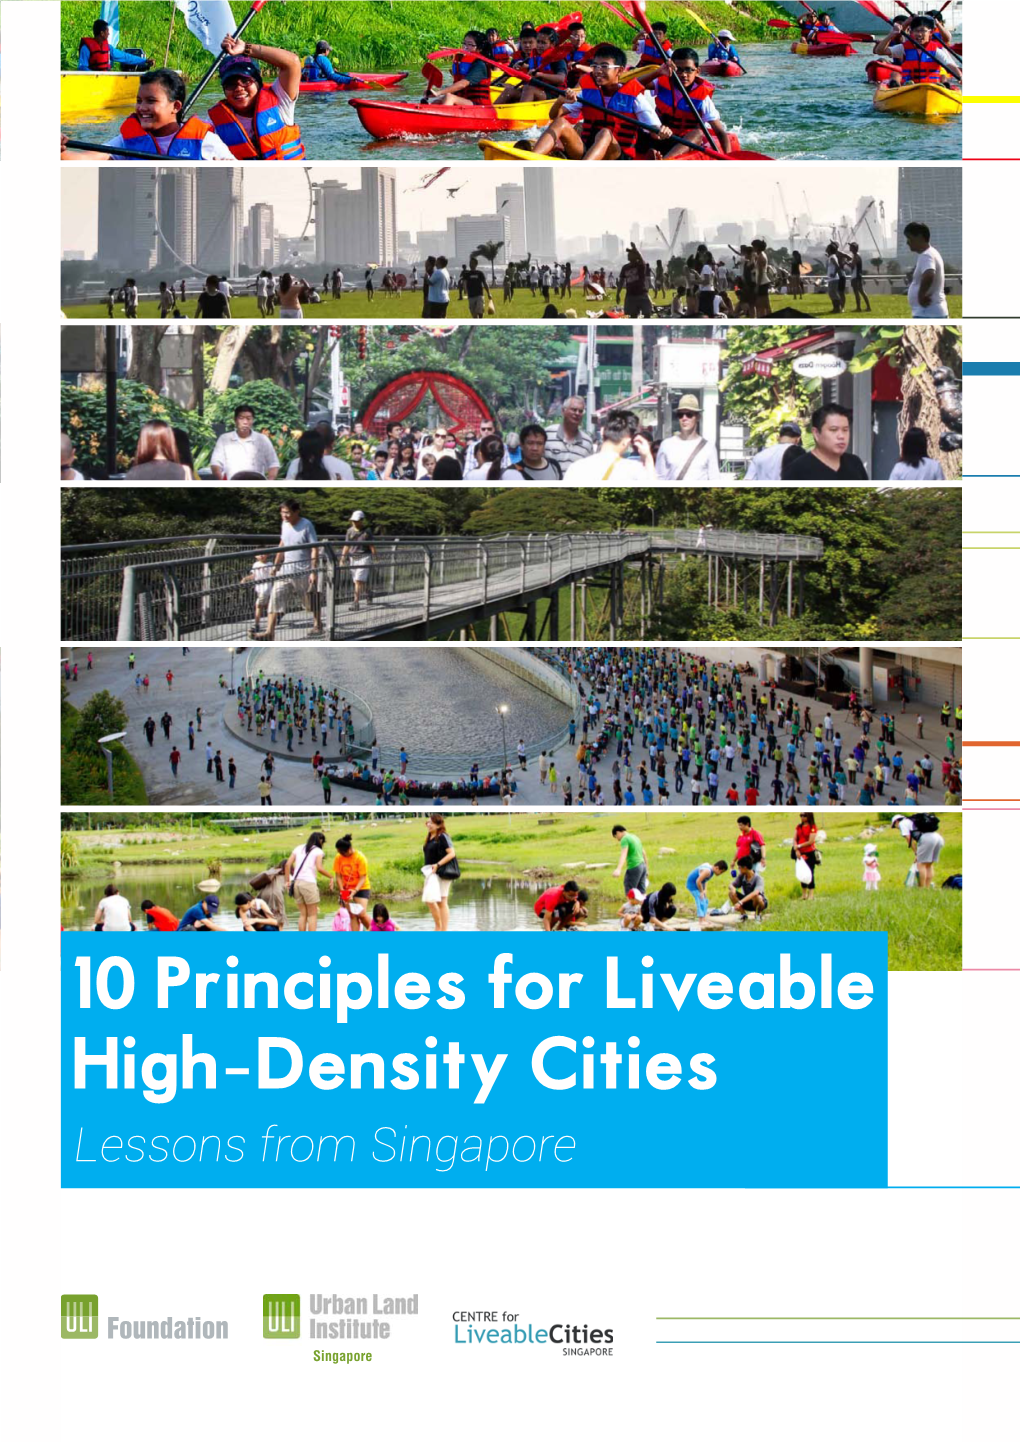 10 Principles for Liveable High-Density Cities Lessons from Singapore